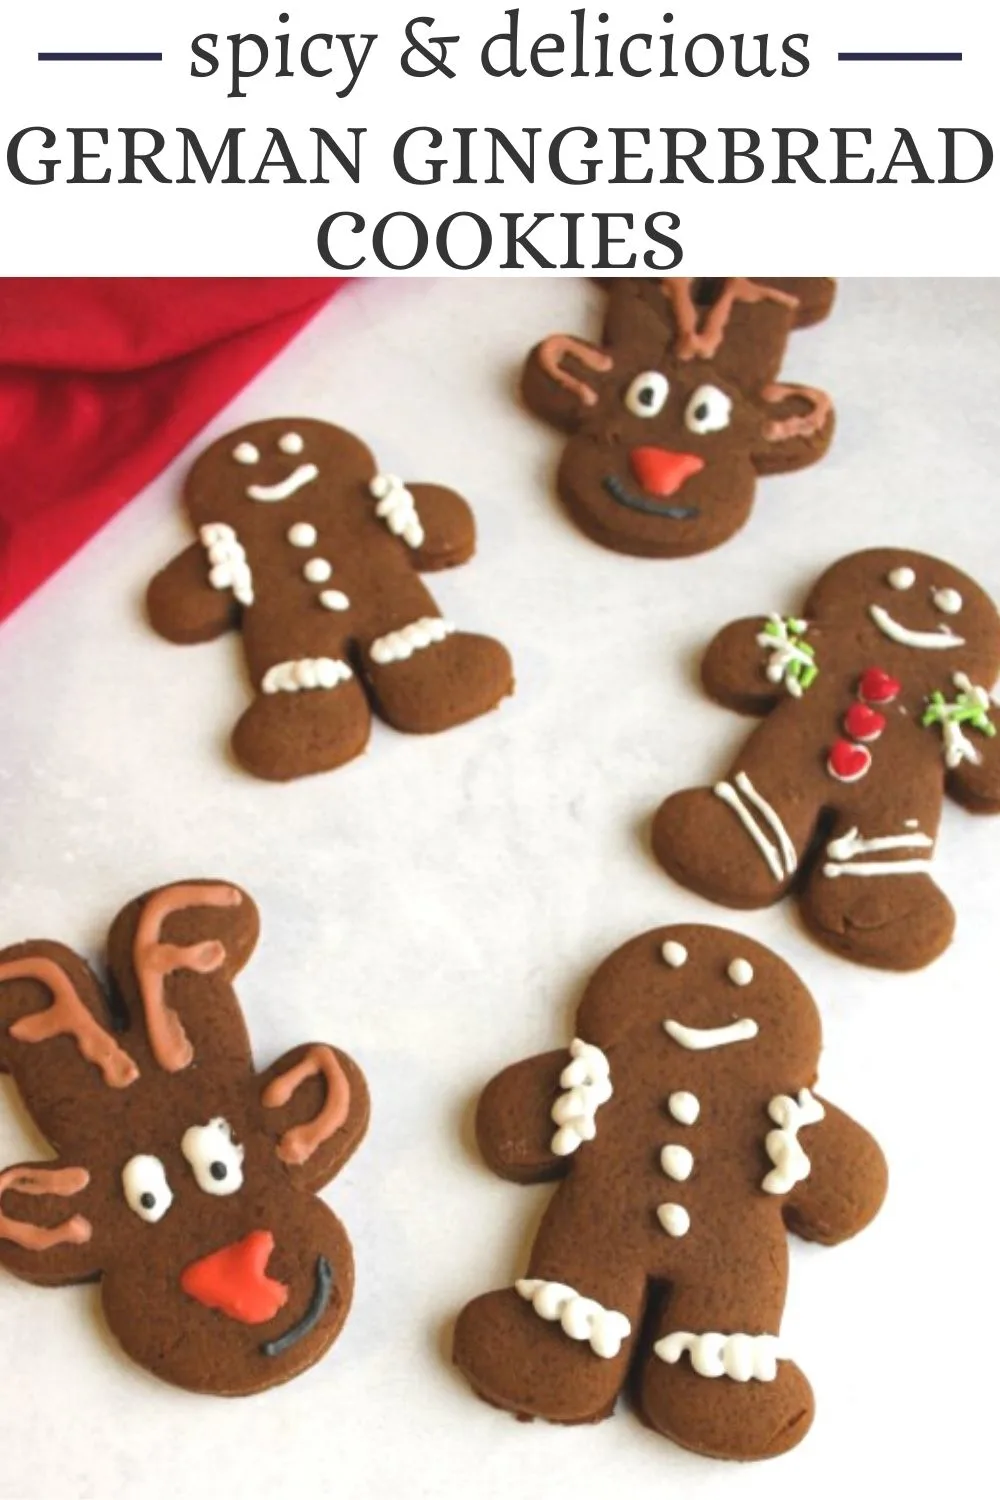 Gingerbread cookies are a Christmas must have! These one have a nice buttery cookie base and all of the spices are likely to already be in your spice cabinet. They will make converts of those who don’t think they like these spicy little fellas!